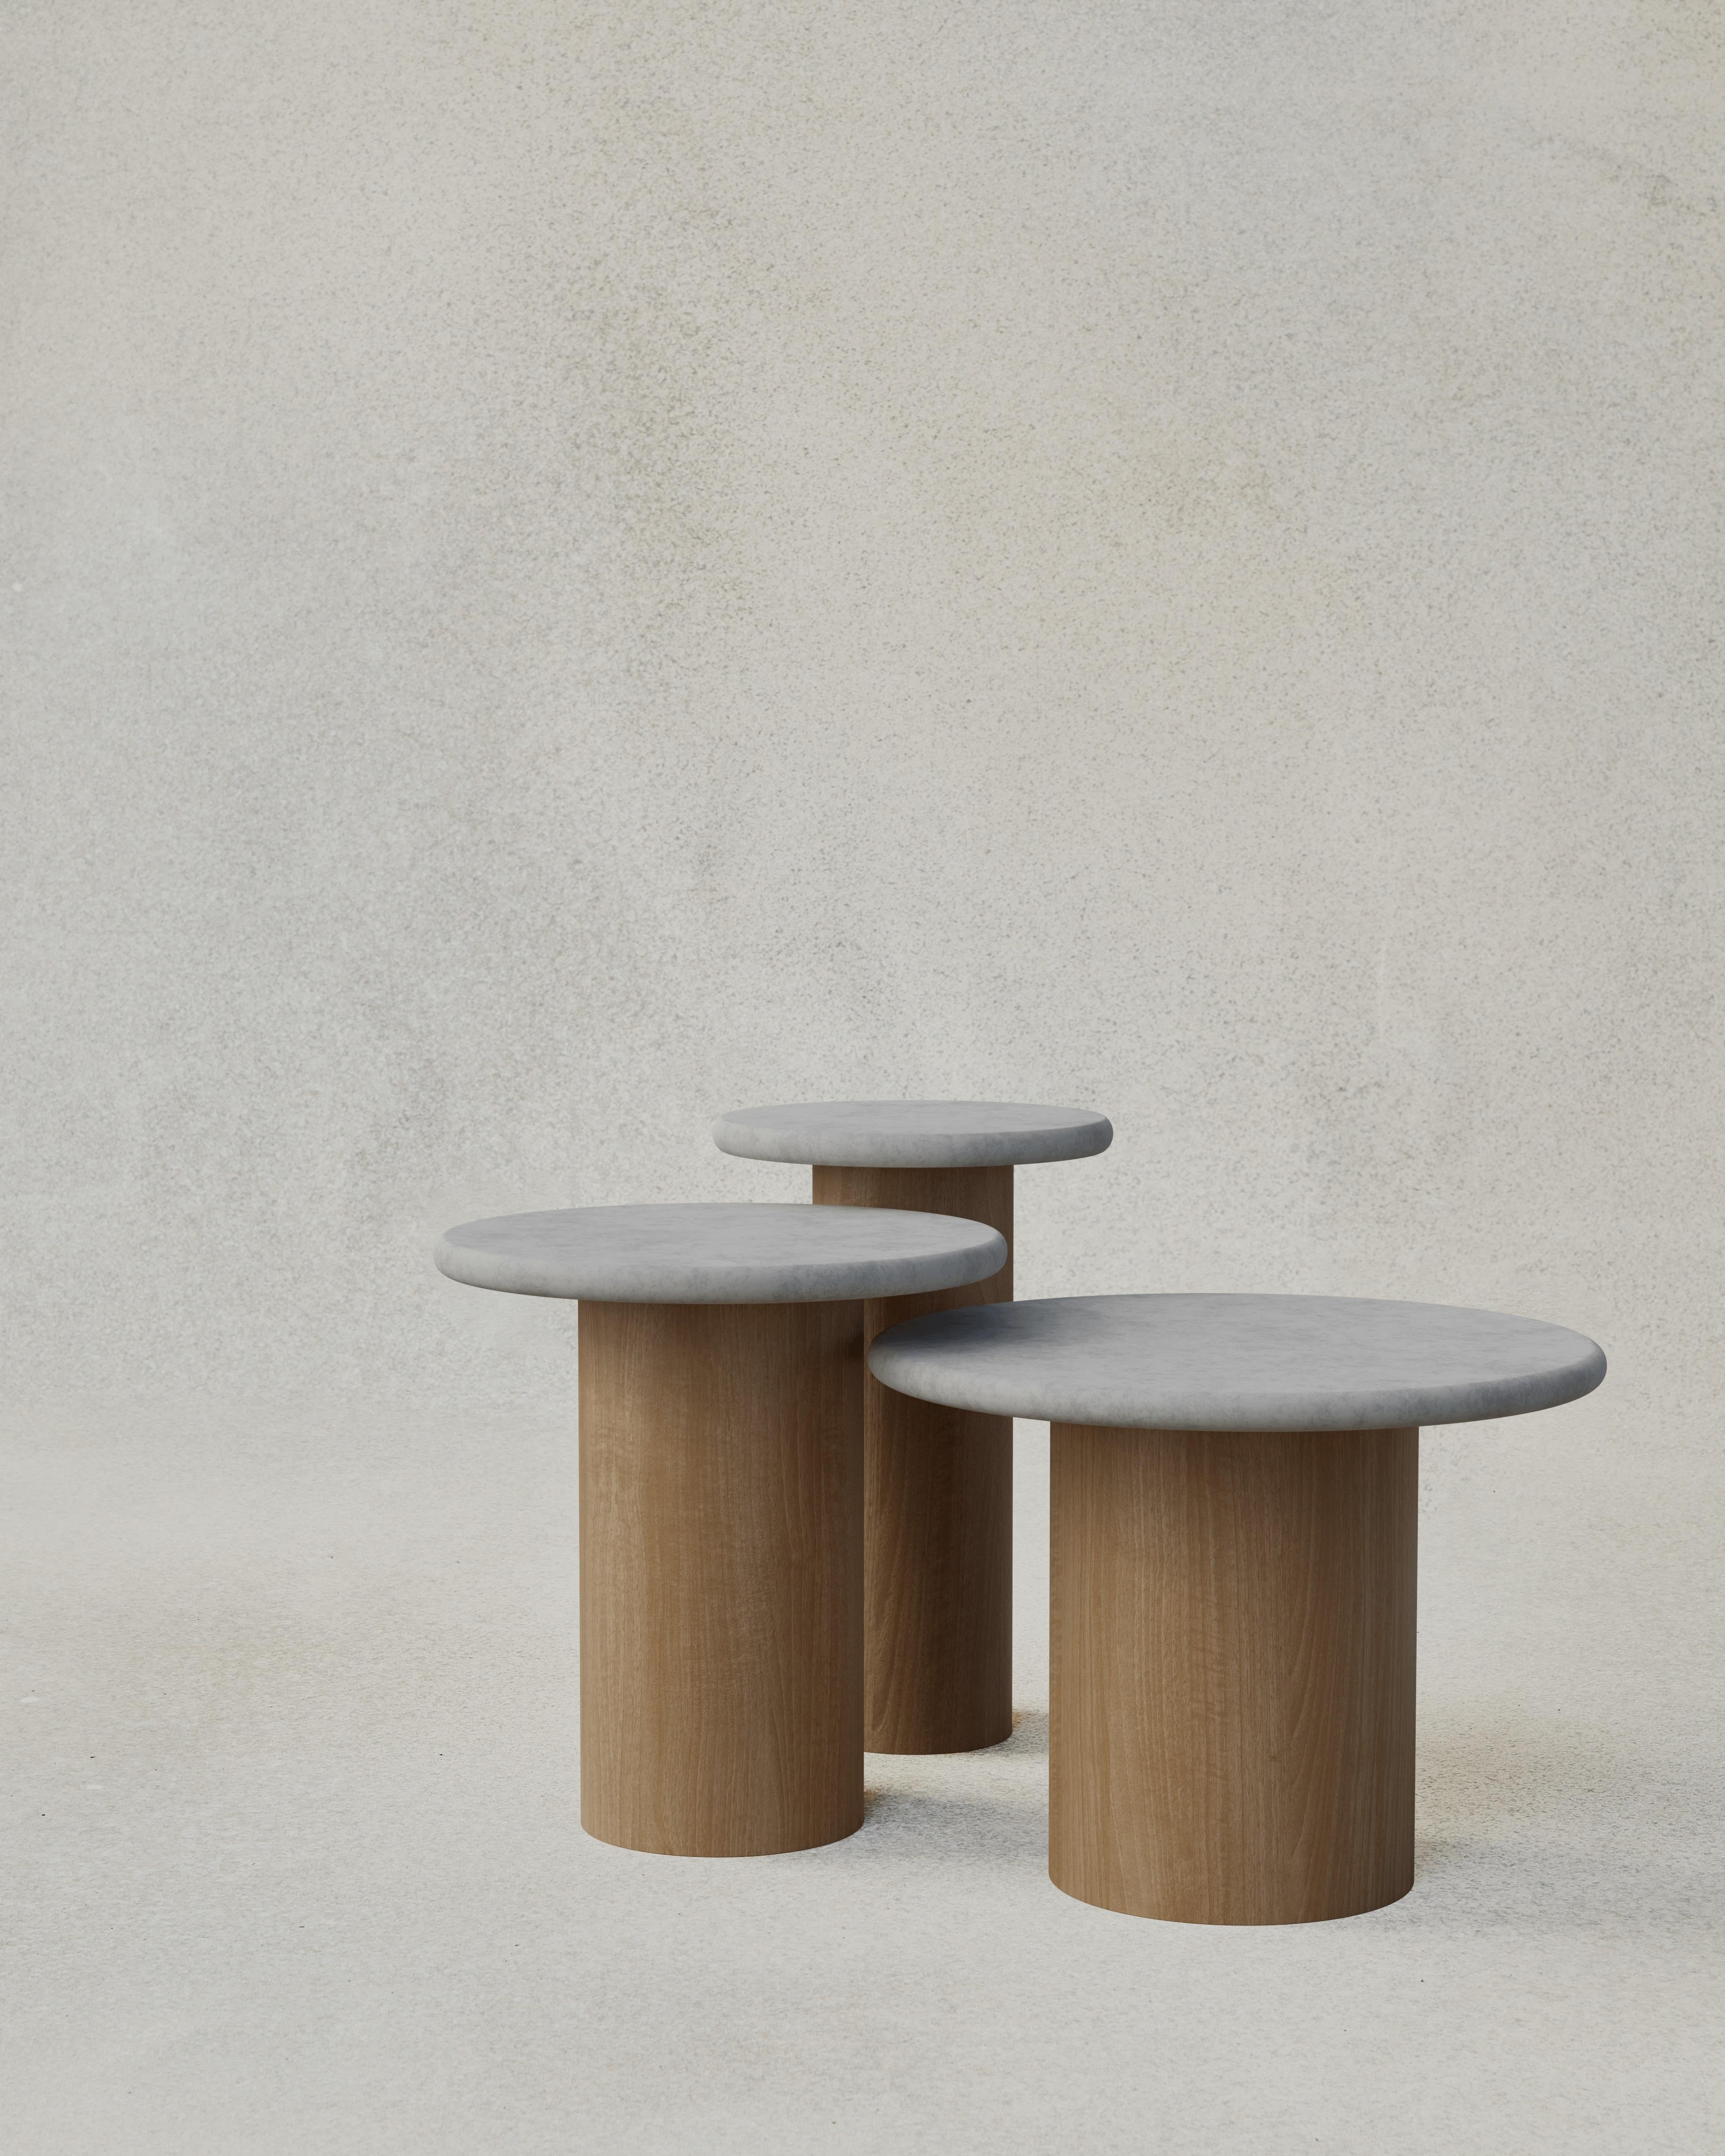 With their circular profiles, varying proportions and potential to be nested, these versatile tables evoke the pattern of raindrops in a pool of water when placed together.

Bought as a set of 300, 400, 500, we add a 10% discount

Tops: Black